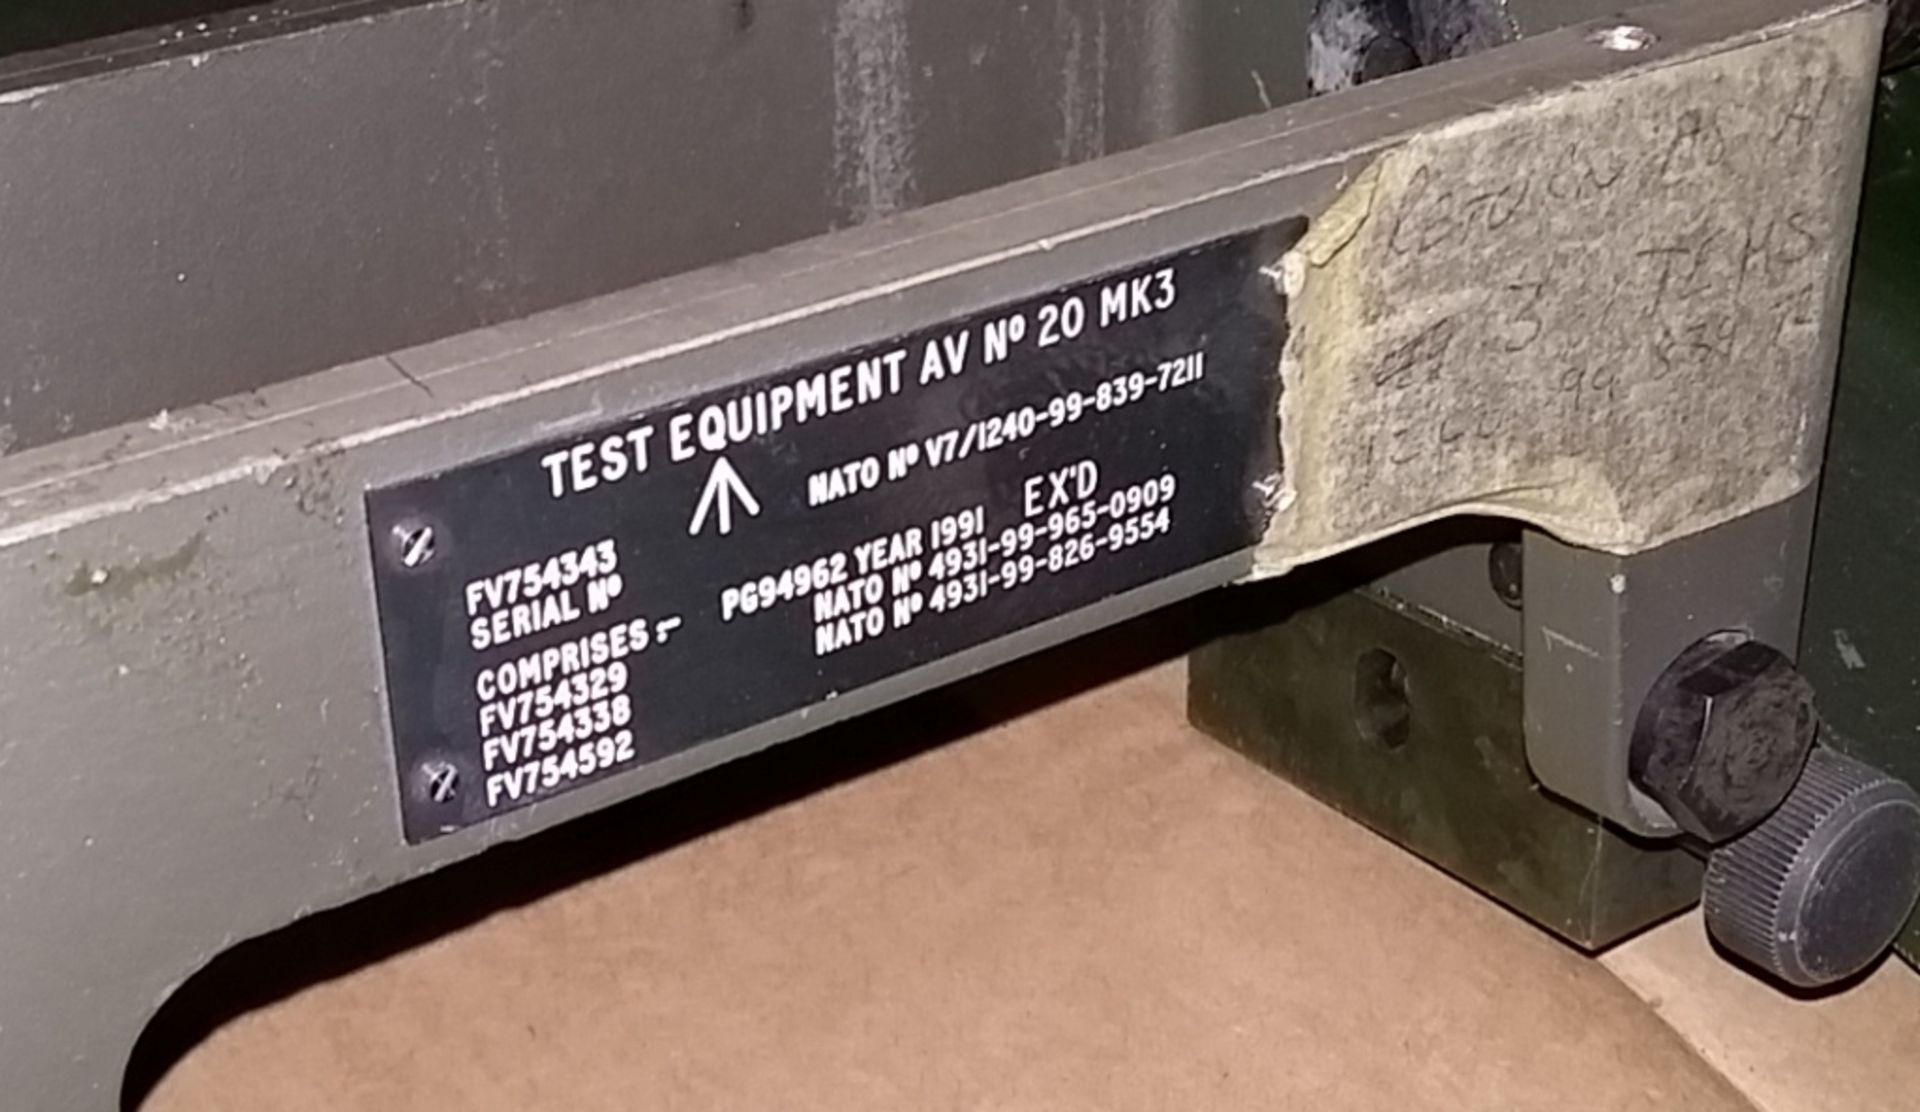 2xTest bench stand - NSN: 1240-99-839-7211 - Image 3 of 3